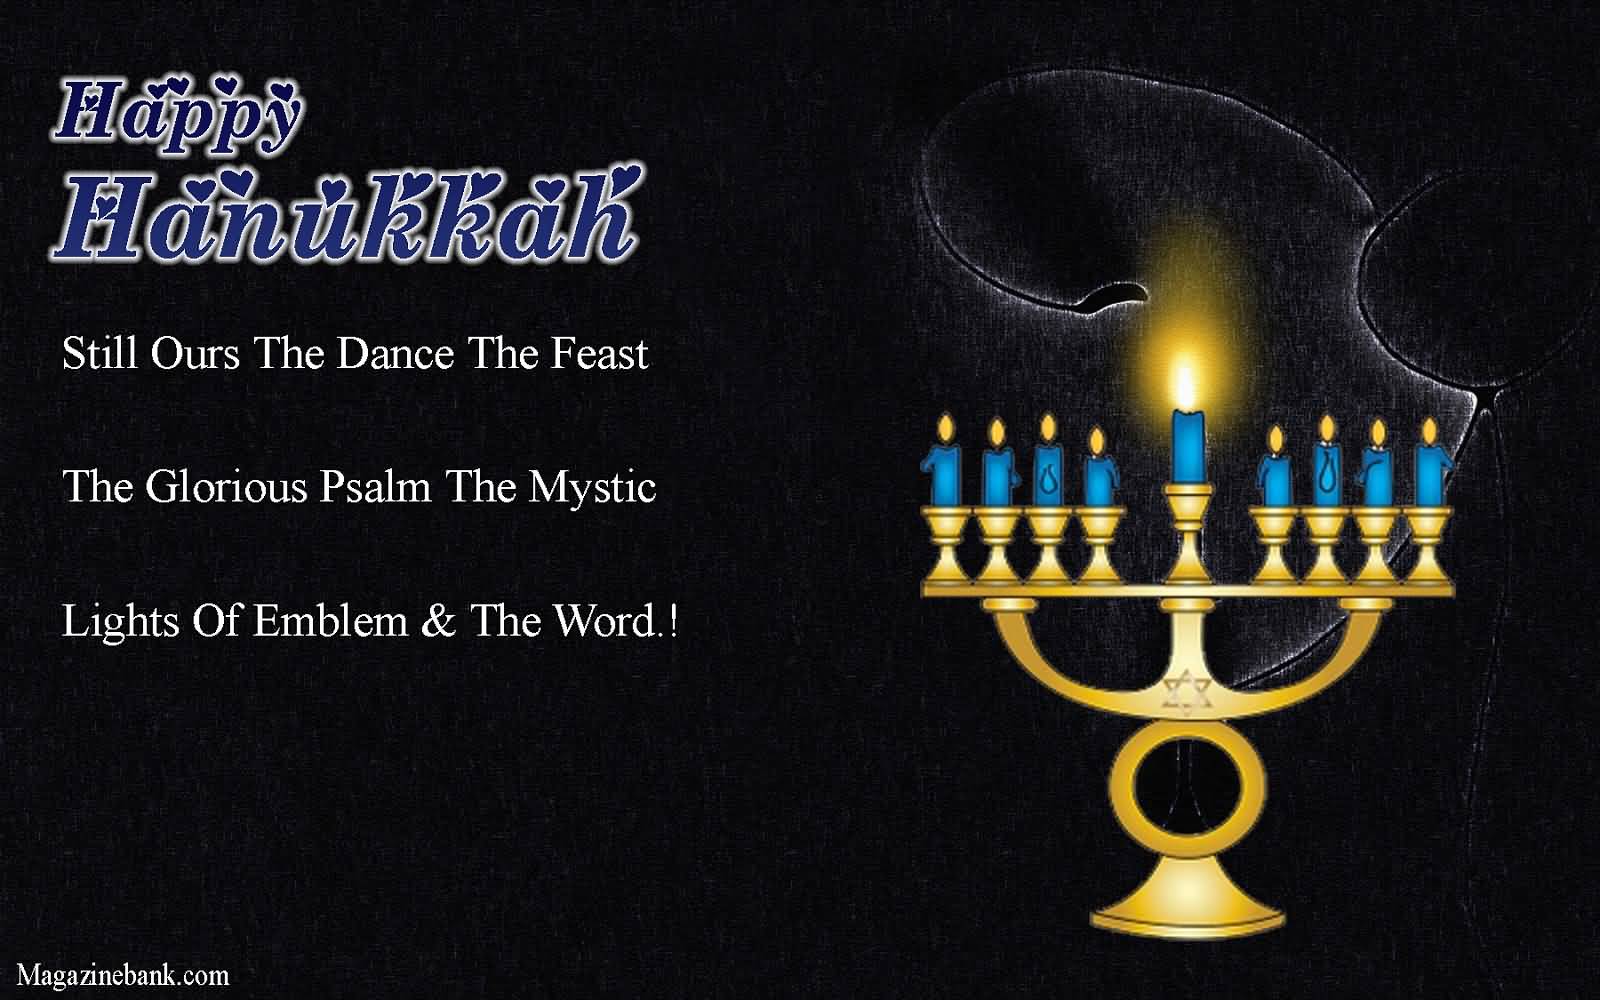 Happy Hanukkah Stills Ours The Dance The Feast The Glorious Psalm The Mystic Lights Of Emblem & The World